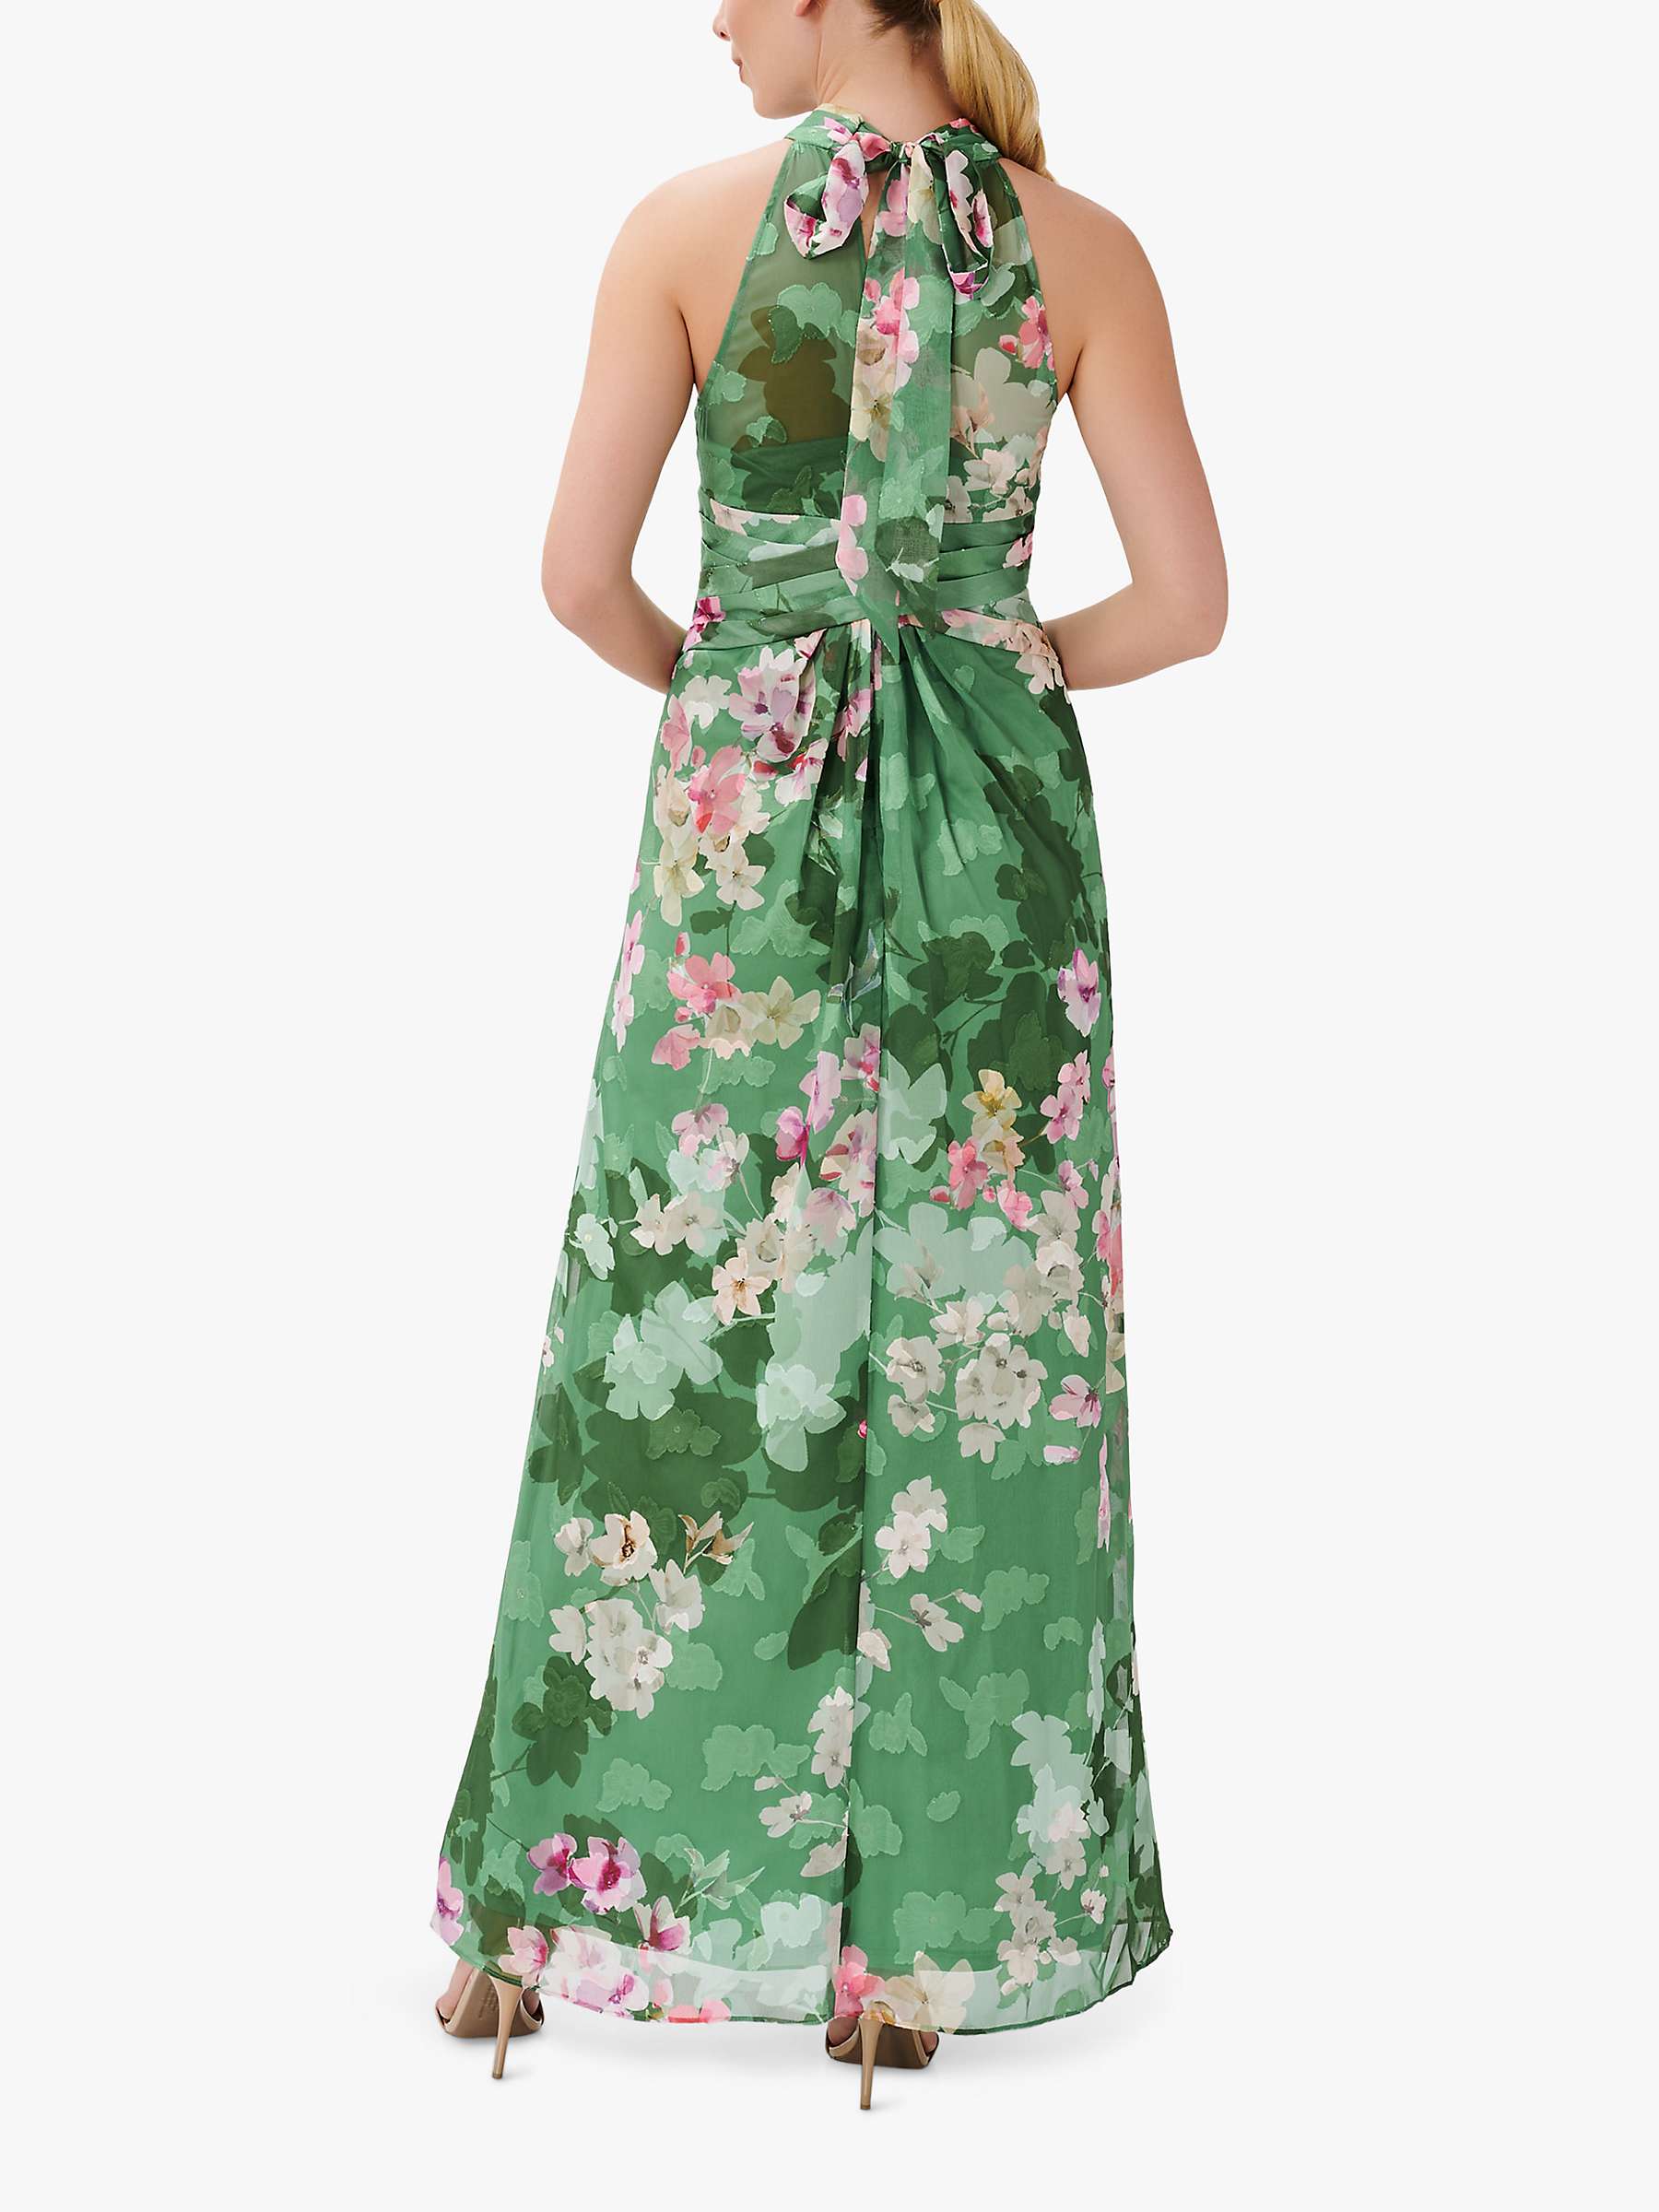 Buy Adrianna Papell Floral Halterneck Maxi Dress, Green/Multi Online at johnlewis.com